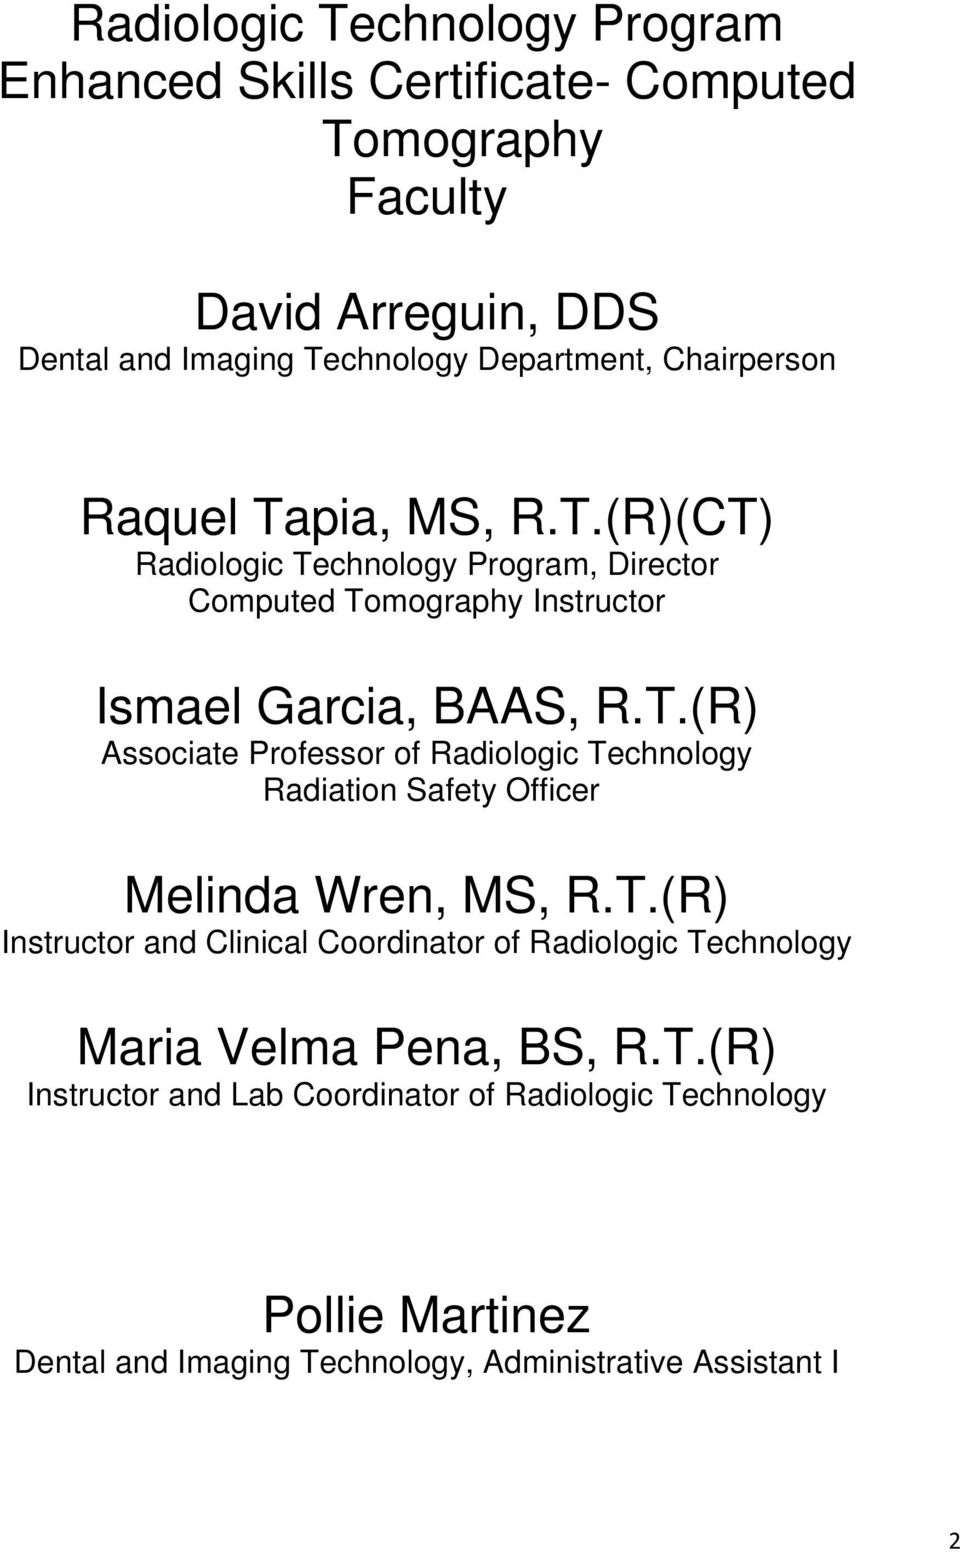 T.(R) Instructor and Clinical Coordinator of Radiologic Technology Maria Velma Pena, BS, R.T.(R) Instructor and Lab Coordinator of Radiologic Technology Pollie Martinez Dental and Imaging Technology, Administrative Assistant I 2